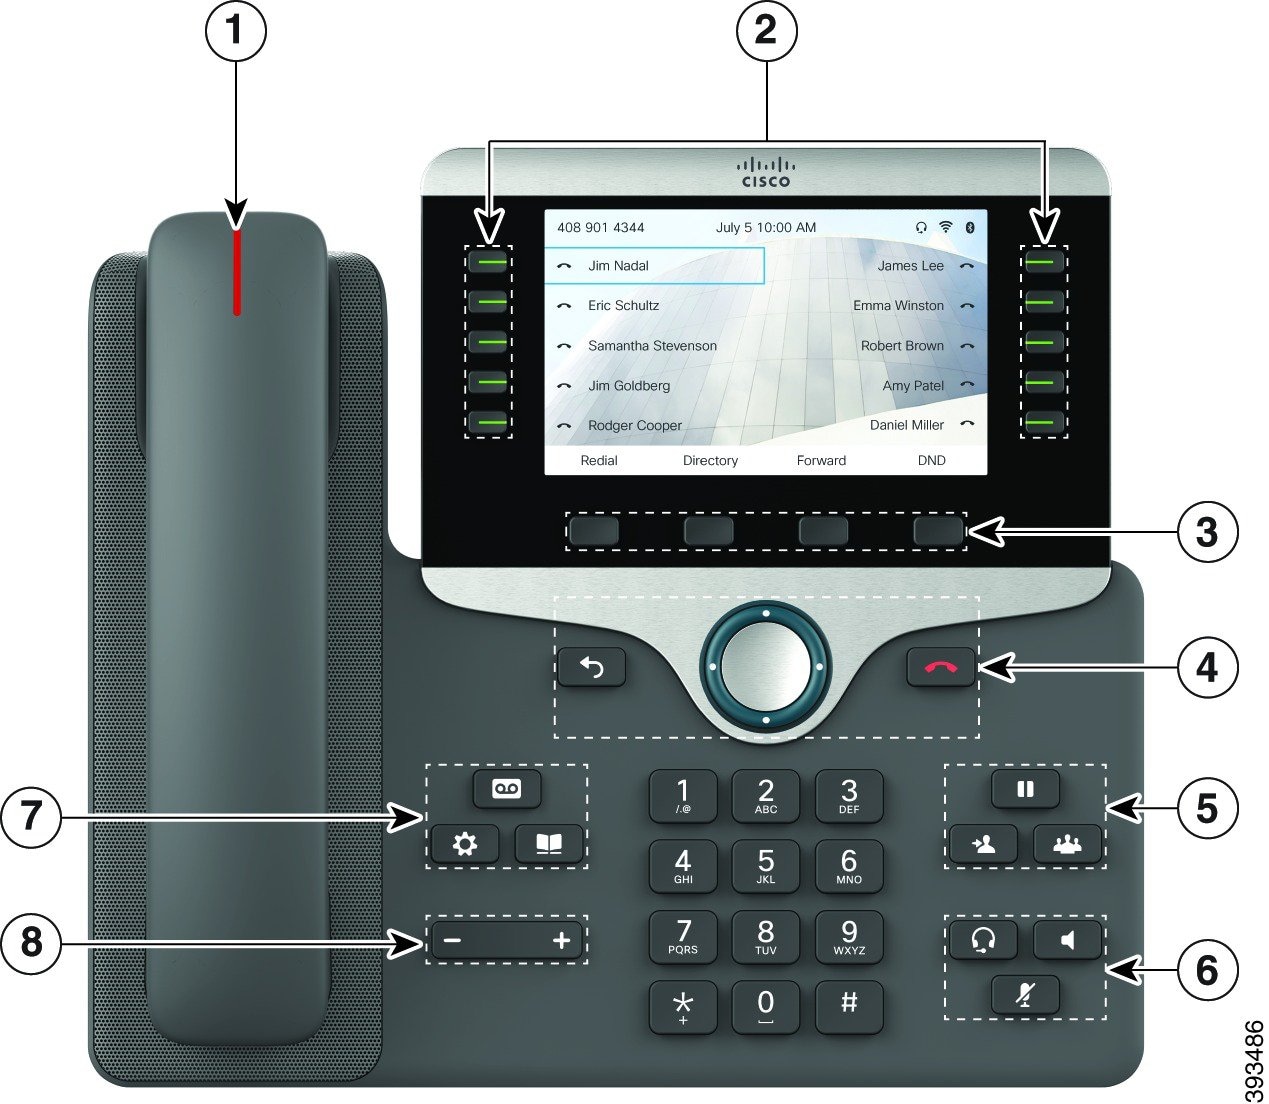 Cisco phone voicemail user guide